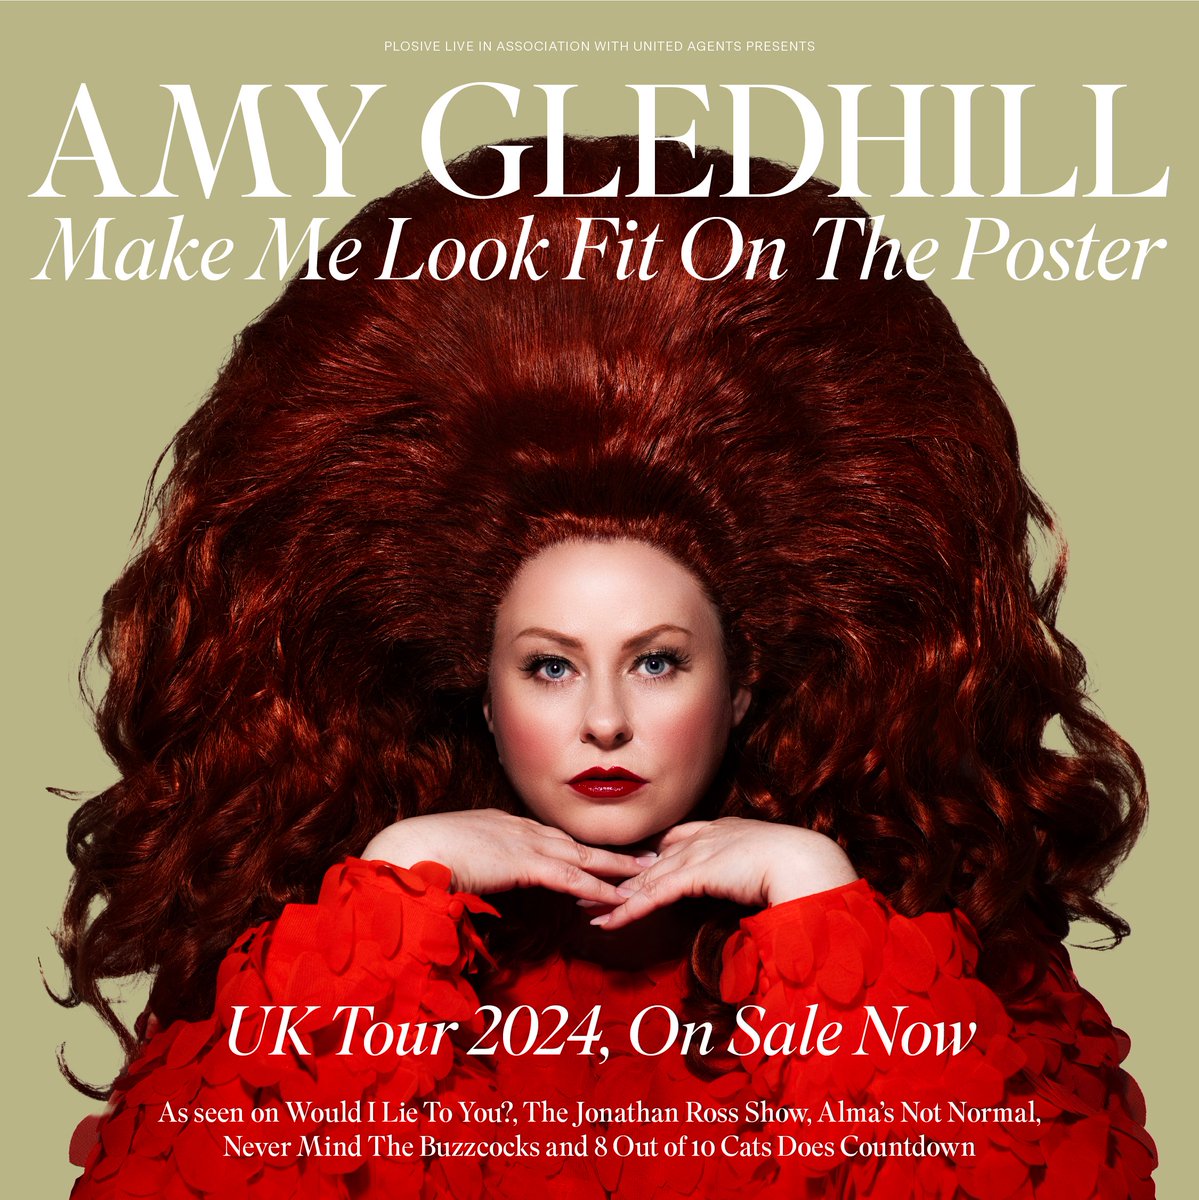 🔥Amy Gledhill: Make Me Look Fit on The Poster Triple Edinburgh Comedy Award nominee, National Comedy Award nominee and 1/3 of cult double act The Delightful Sausage – returns with a brand new show about self-confidence, romance and bin bags💯 theatticsouthampton.co.uk/products/amy-g…